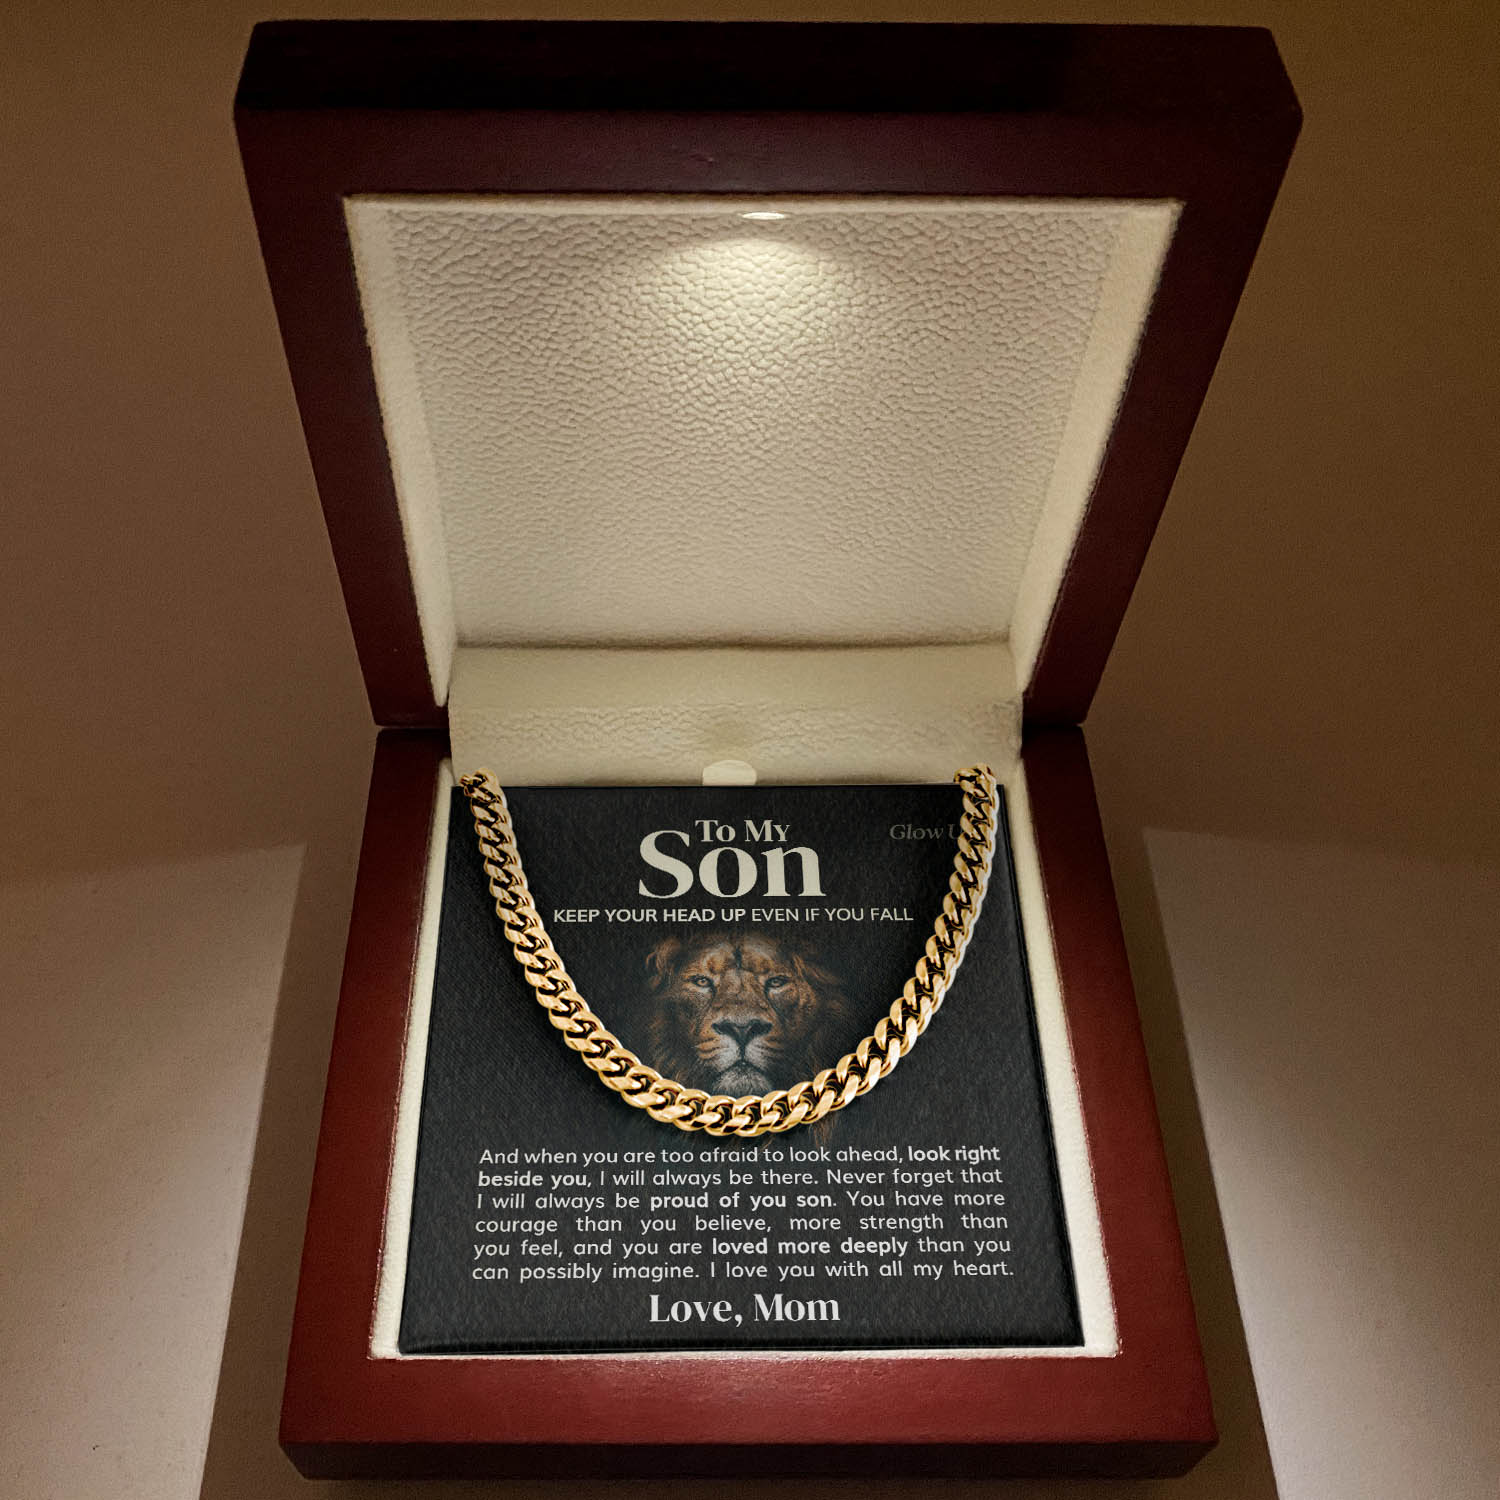 ShineOn Fulfillment Jewelry 14K Yellow Gold Finish / Luxury LED Box To my Son - Keep your head up - Cuban Link Chain